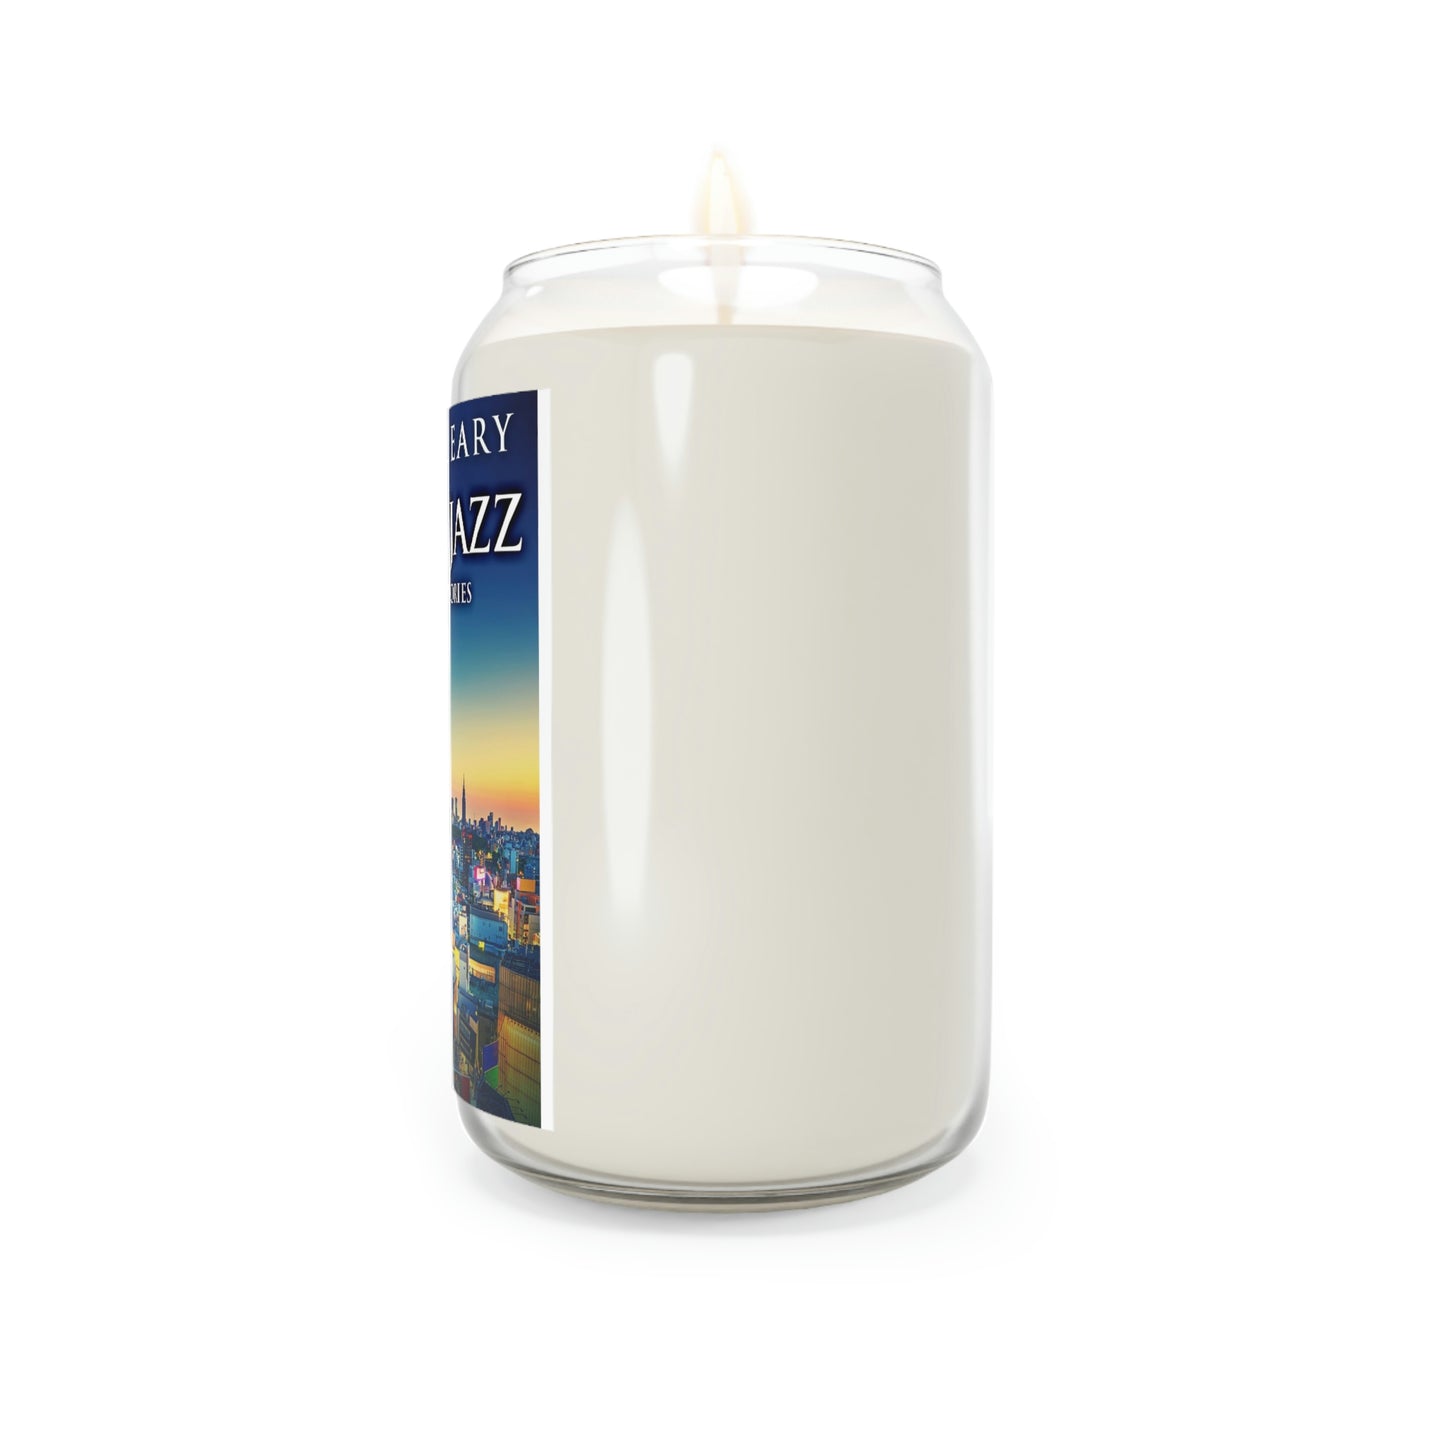 Tokyo Jazz And Other Stories - Scented Candle